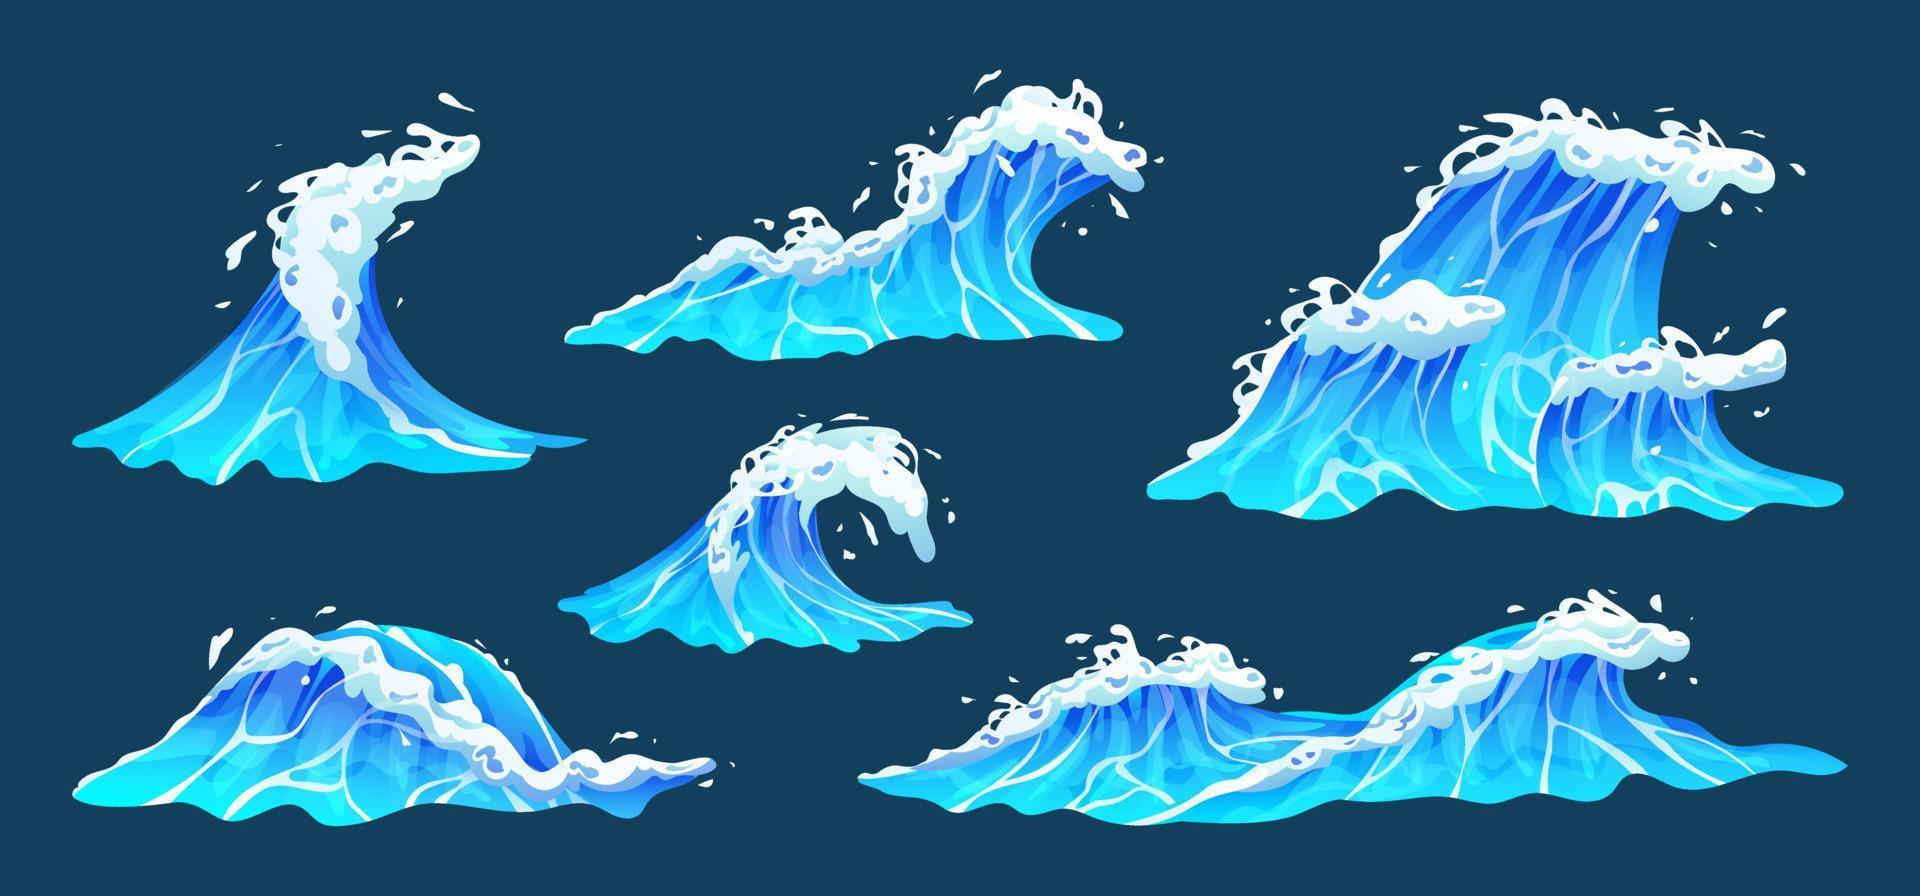 Sea waves vector illustration set. Collection of blue ocean waves with white foam in cartoon style